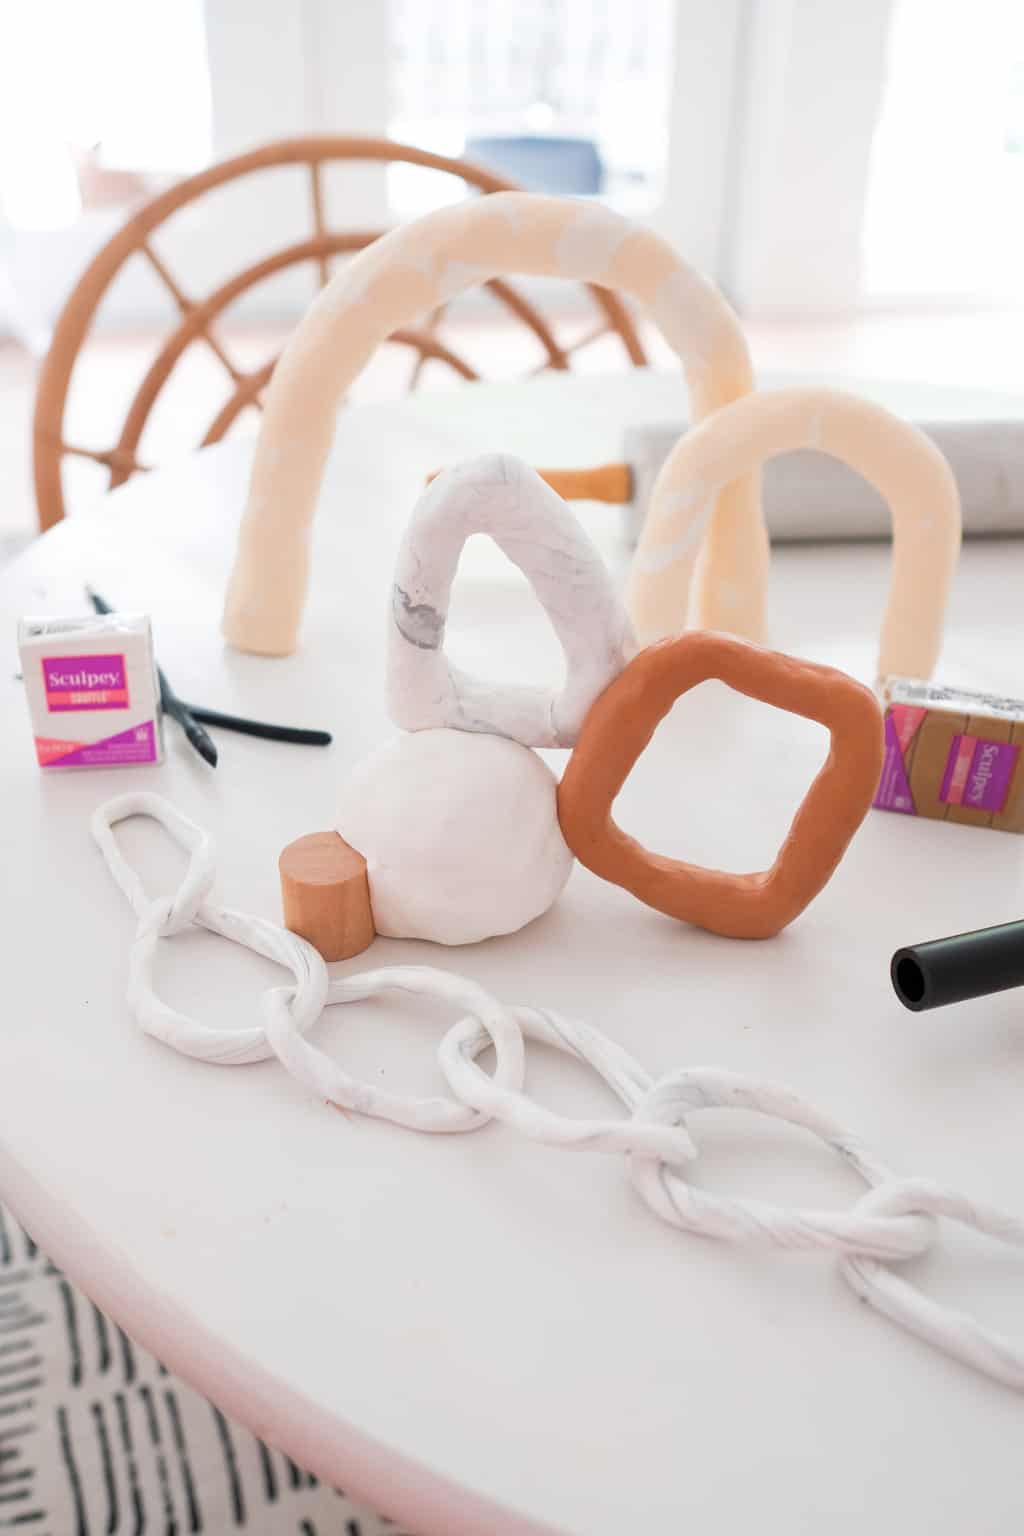 photo the different things you can make with Sculpey clay by top Houston lifestyle blogger Ashley Rose of Sugar & Cloth